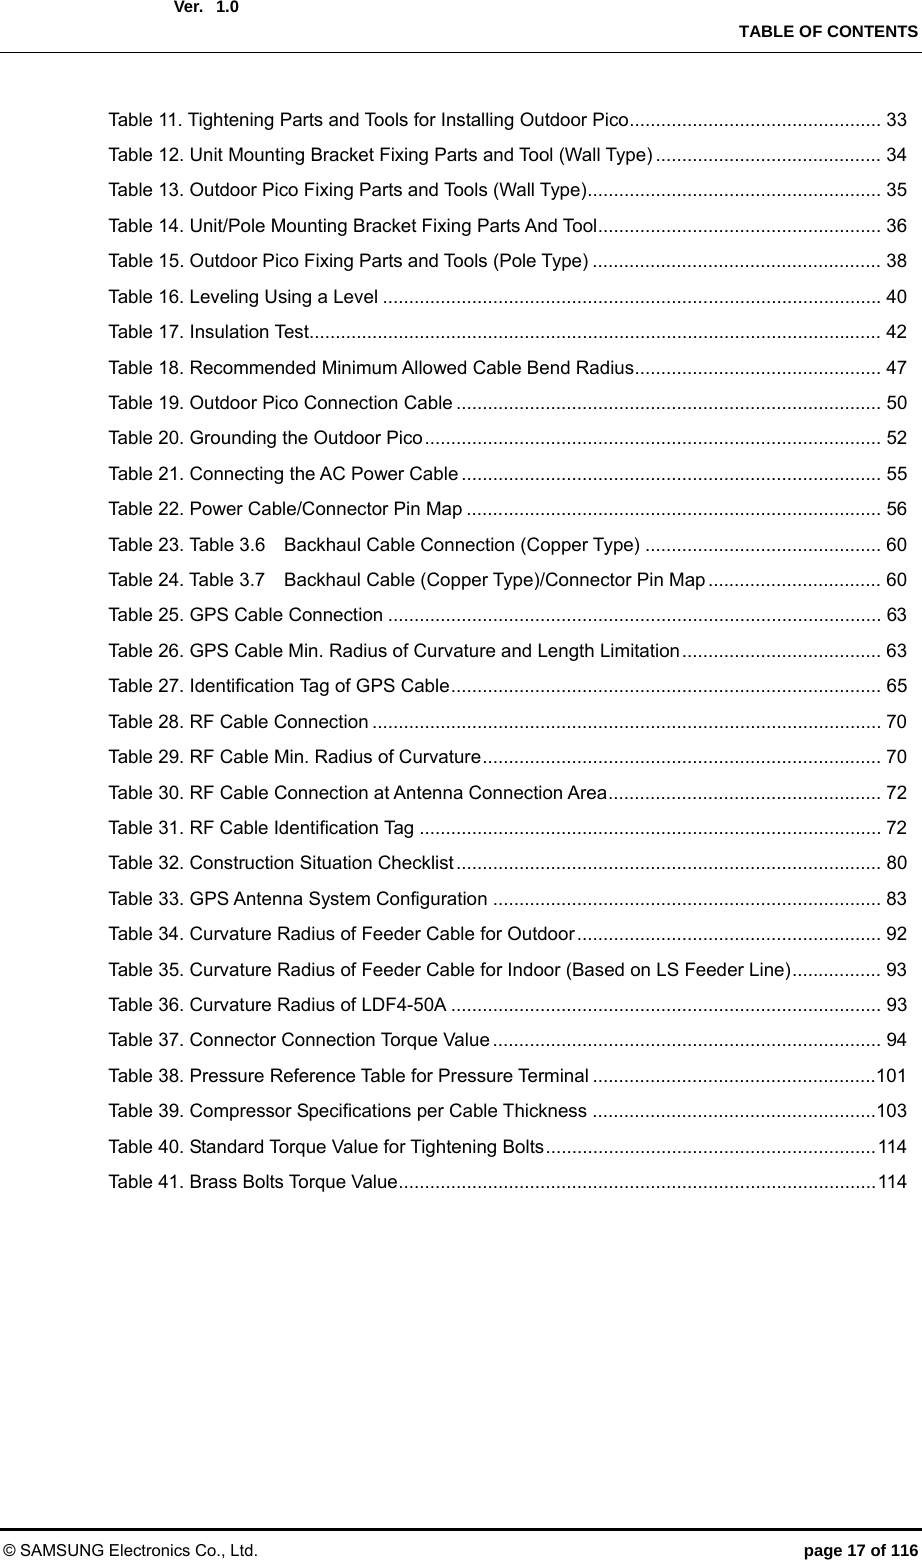  Ver.   TABLE OF CONTENTS © SAMSUNG Electronics Co., Ltd.  page 17 of 116 1.0 Table 11. Tightening Parts and Tools for Installing Outdoor Pico ................................................ 33 Table 12. Unit Mounting Bracket Fixing Parts and Tool (Wall Type) ...........................................  34 Table 13. Outdoor Pico Fixing Parts and Tools (Wall Type) ........................................................ 35 Table 14. Unit/Pole Mounting Bracket Fixing Parts And Tool ...................................................... 36 Table 15. Outdoor Pico Fixing Parts and Tools (Pole Type) ....................................................... 38 Table 16. Leveling Using a Level ............................................................................................... 40 Table 17. Insulation Test............................................................................................................. 42 Table 18. Recommended Minimum Allowed Cable Bend Radius ............................................... 47 Table 19. Outdoor Pico Connection Cable ................................................................................. 50 Table 20. Grounding the Outdoor Pico .......................................................................................  52 Table 21. Connecting the AC Power Cable ................................................................................  55 Table 22. Power Cable/Connector Pin Map ............................................................................... 56 Table 23. Table 3.6    Backhaul Cable Connection (Copper Type) ............................................. 60 Table 24. Table 3.7    Backhaul Cable (Copper Type)/Connector Pin Map ................................. 60 Table 25. GPS Cable Connection .............................................................................................. 63 Table 26. GPS Cable Min. Radius of Curvature and Length Limitation ......................................  63 Table 27. Identification Tag of GPS Cable .................................................................................. 65 Table 28. RF Cable Connection ................................................................................................. 70 Table 29. RF Cable Min. Radius of Curvature ............................................................................  70 Table 30. RF Cable Connection at Antenna Connection Area ....................................................  72 Table 31. RF Cable Identification Tag ........................................................................................ 72 Table 32. Construction Situation Checklist ................................................................................. 80 Table 33. GPS Antenna System Configuration .......................................................................... 83 Table 34. Curvature Radius of Feeder Cable for Outdoor ..........................................................  92 Table 35. Curvature Radius of Feeder Cable for Indoor (Based on LS Feeder Line) .................  93 Table 36. Curvature Radius of LDF4-50A .................................................................................. 93 Table 37. Connector Connection Torque Value .......................................................................... 94 Table 38. Pressure Reference Table for Pressure Terminal ......................................................101 Table 39. Compressor Specifications per Cable Thickness ......................................................103 Table 40. Standard Torque Value for Tightening Bolts ............................................................... 114 Table 41. Brass Bolts Torque Value ........................................................................................... 114    